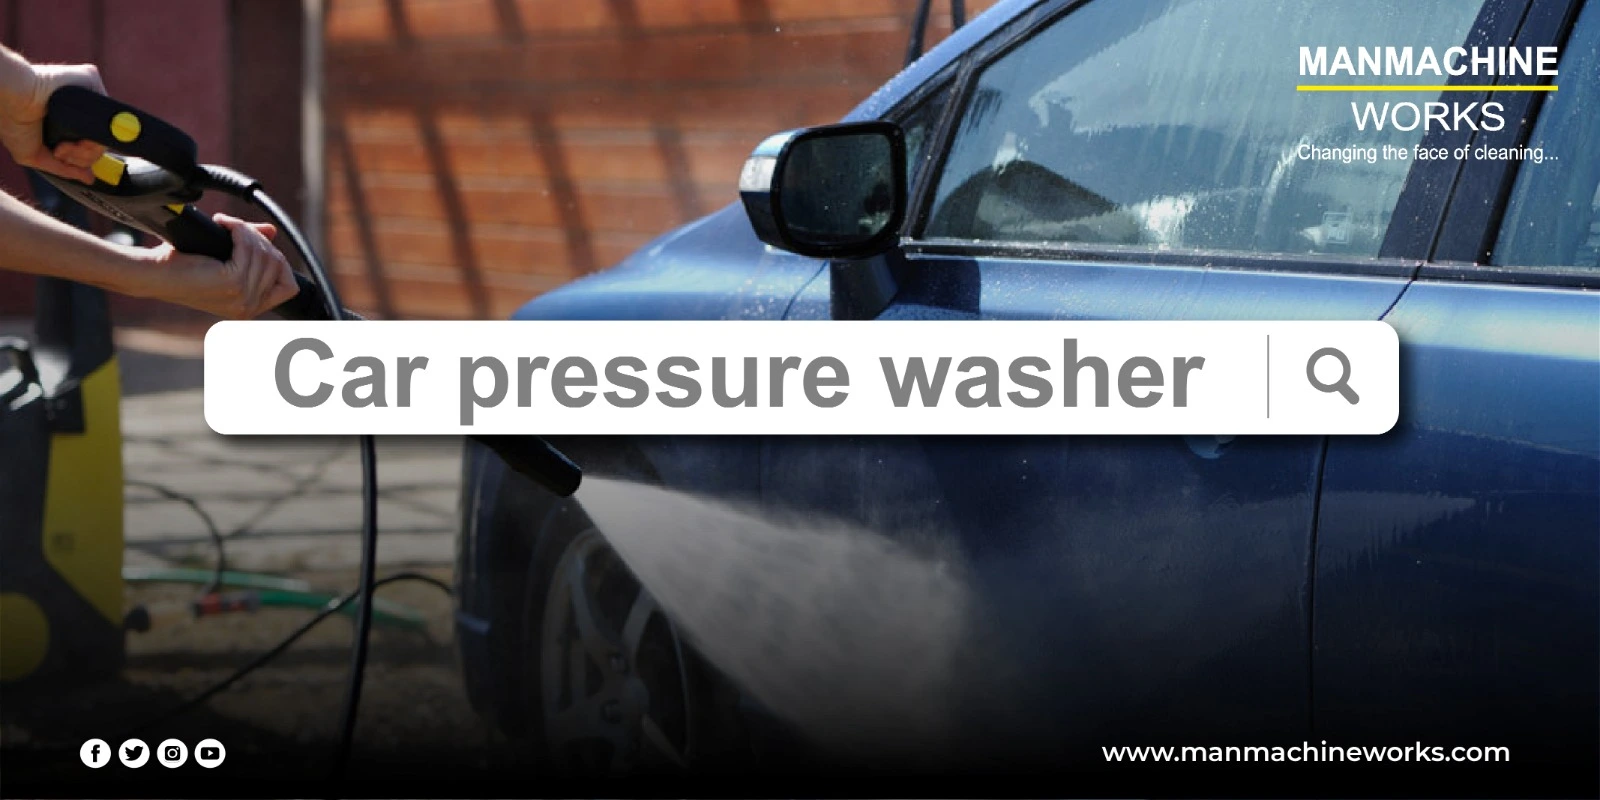 Is It Safe to Use a Pressure Washer on My Car? Pros, Cons, and